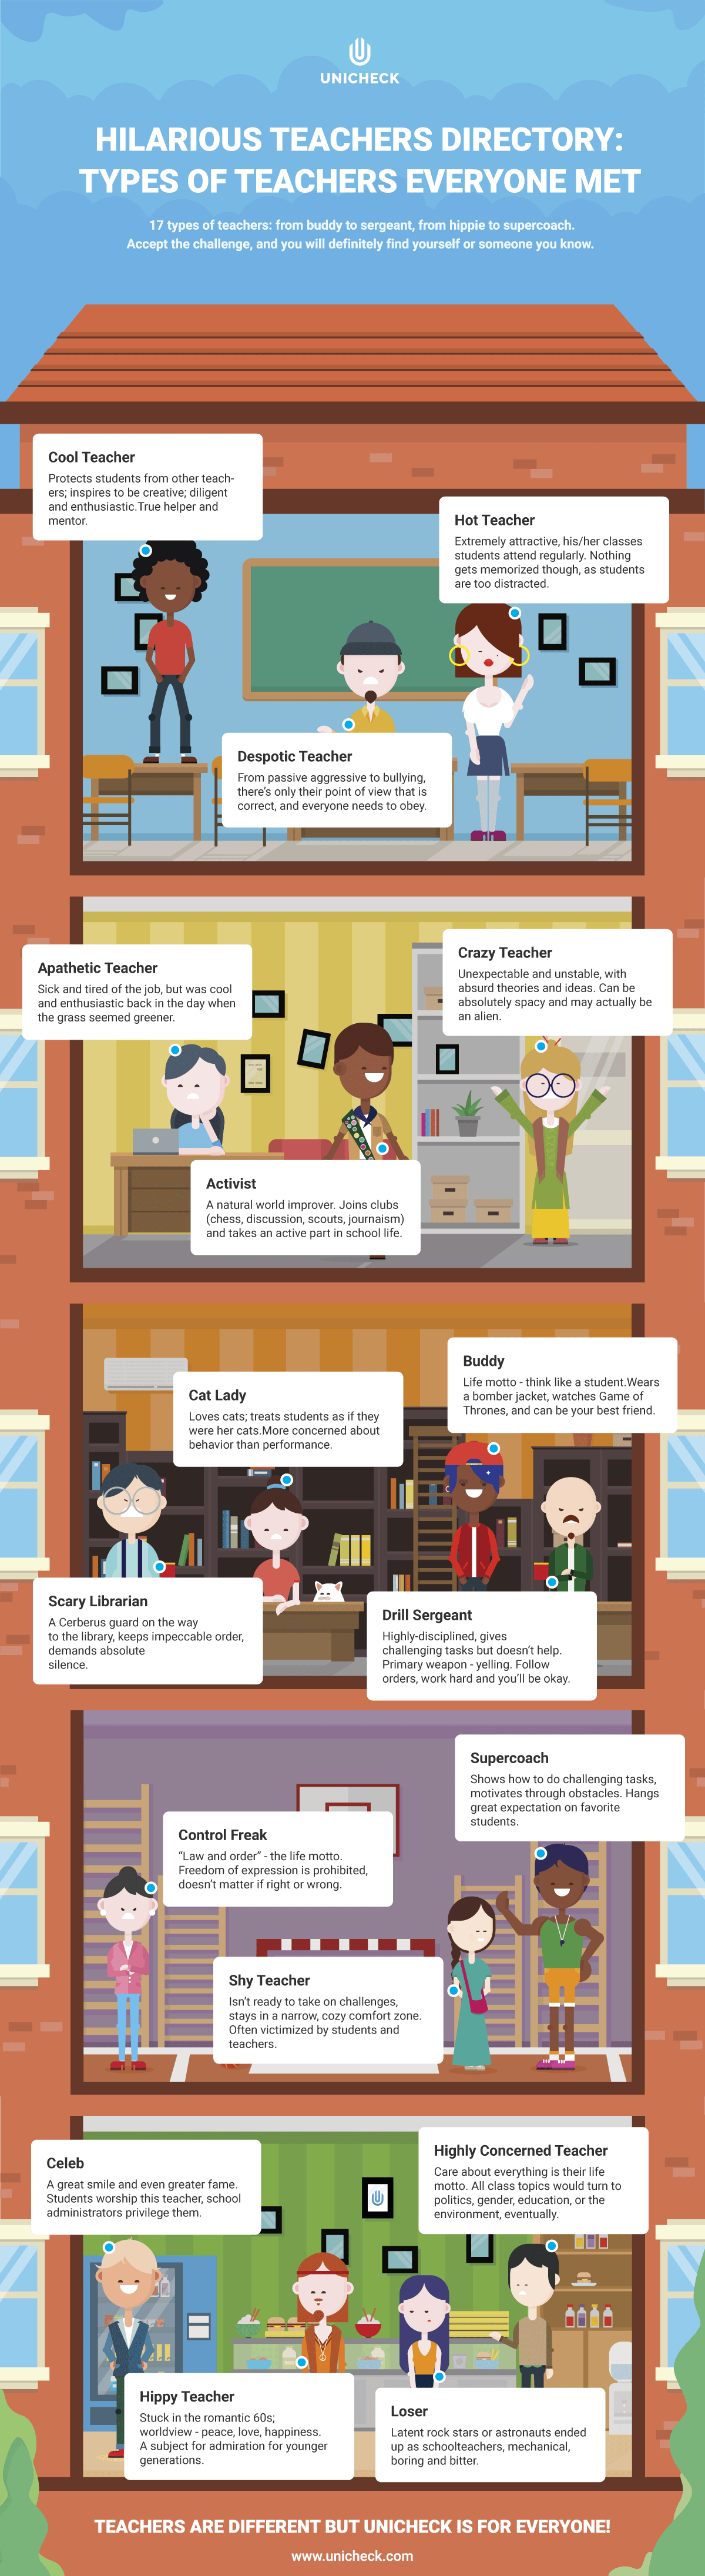 17 Types of Teachers Everyone Knows Infographic